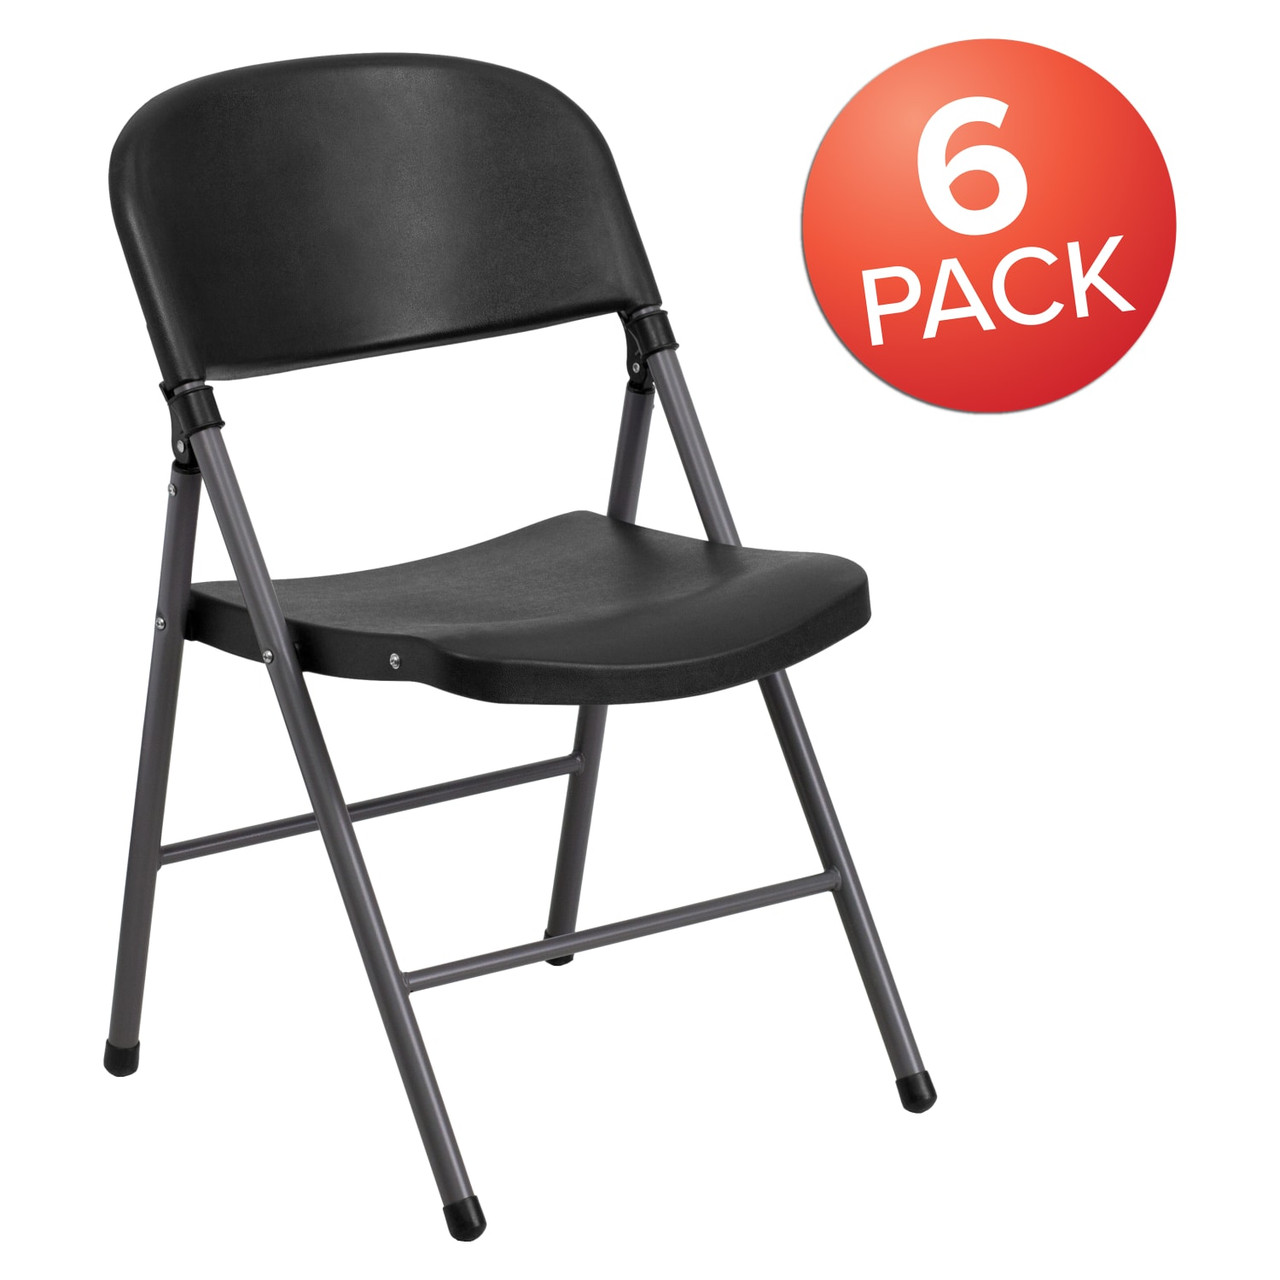 6 Pack Hercules  Black Plastic Folding Chair with Charcoal Frame